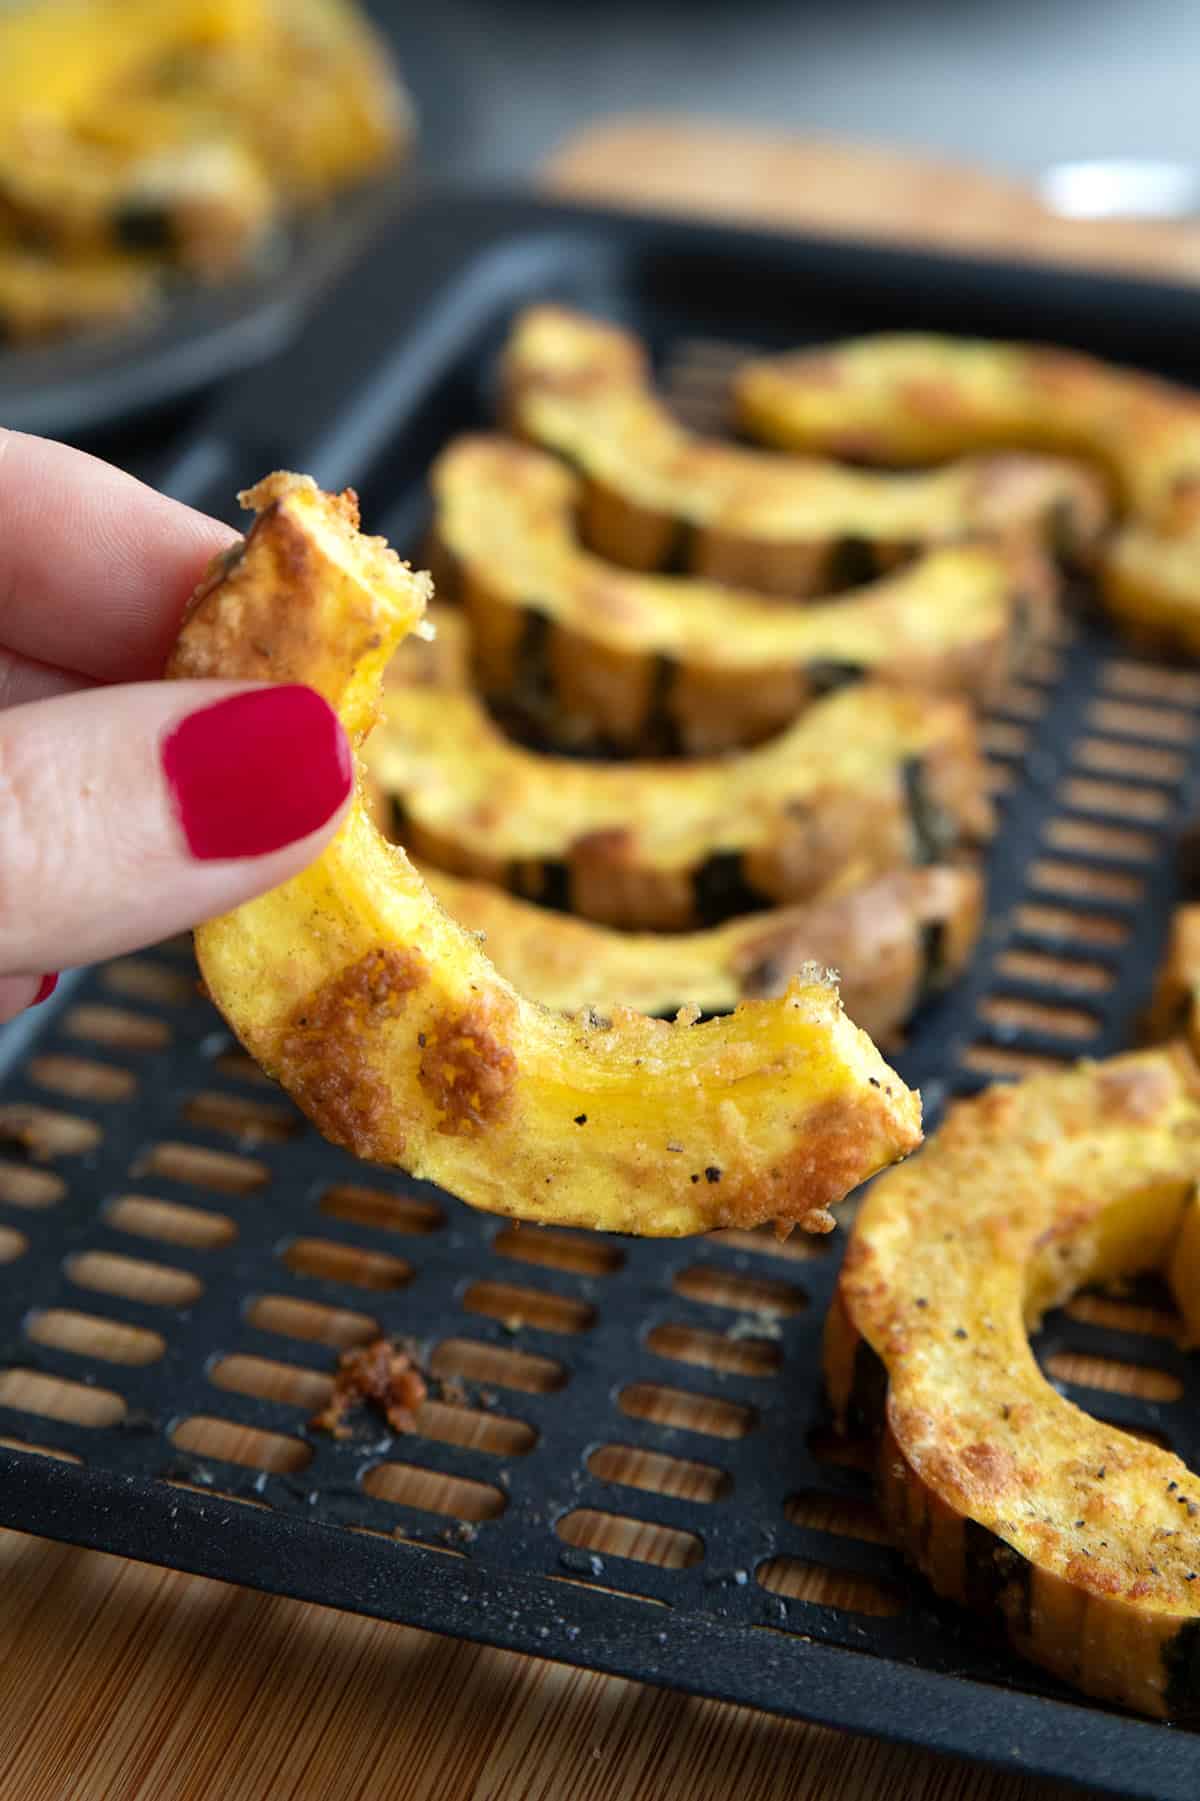 A hand holding up a piece of Roasted Delicata Squash from an air fryer tray.